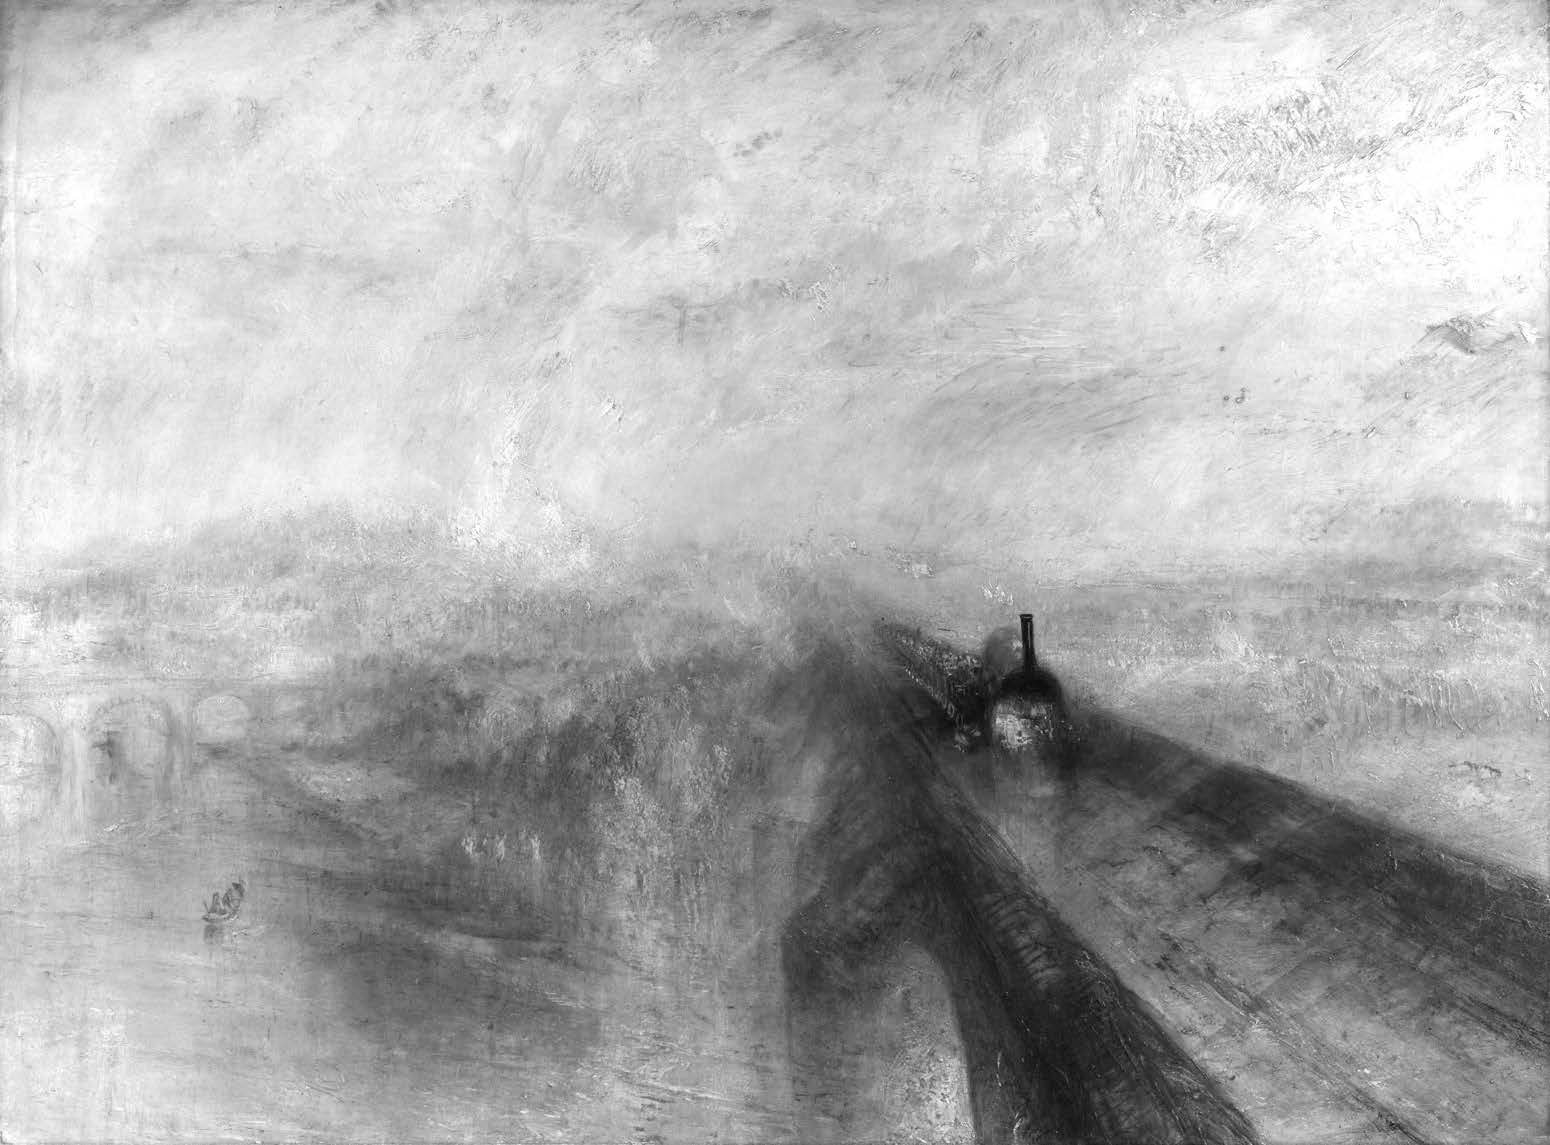 Rain, Steam and Speed: The Great Western Railway (1844), by J. M. W. Turner.